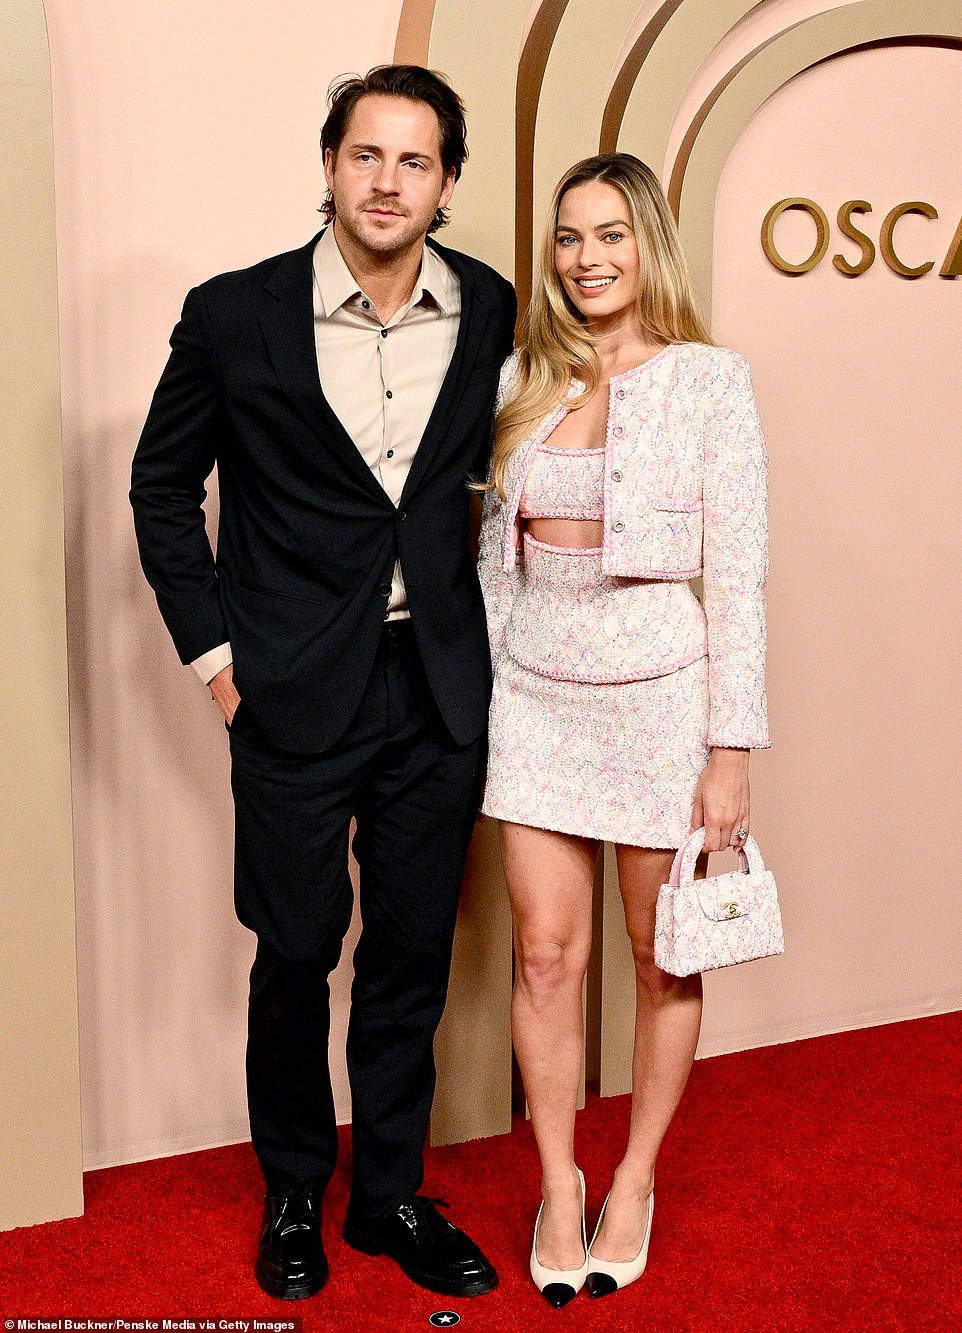 The three-time Oscar nominee was accompanied on the red carpet by her real-life Ken, aka her husband of seven years, Tom Ackerley.